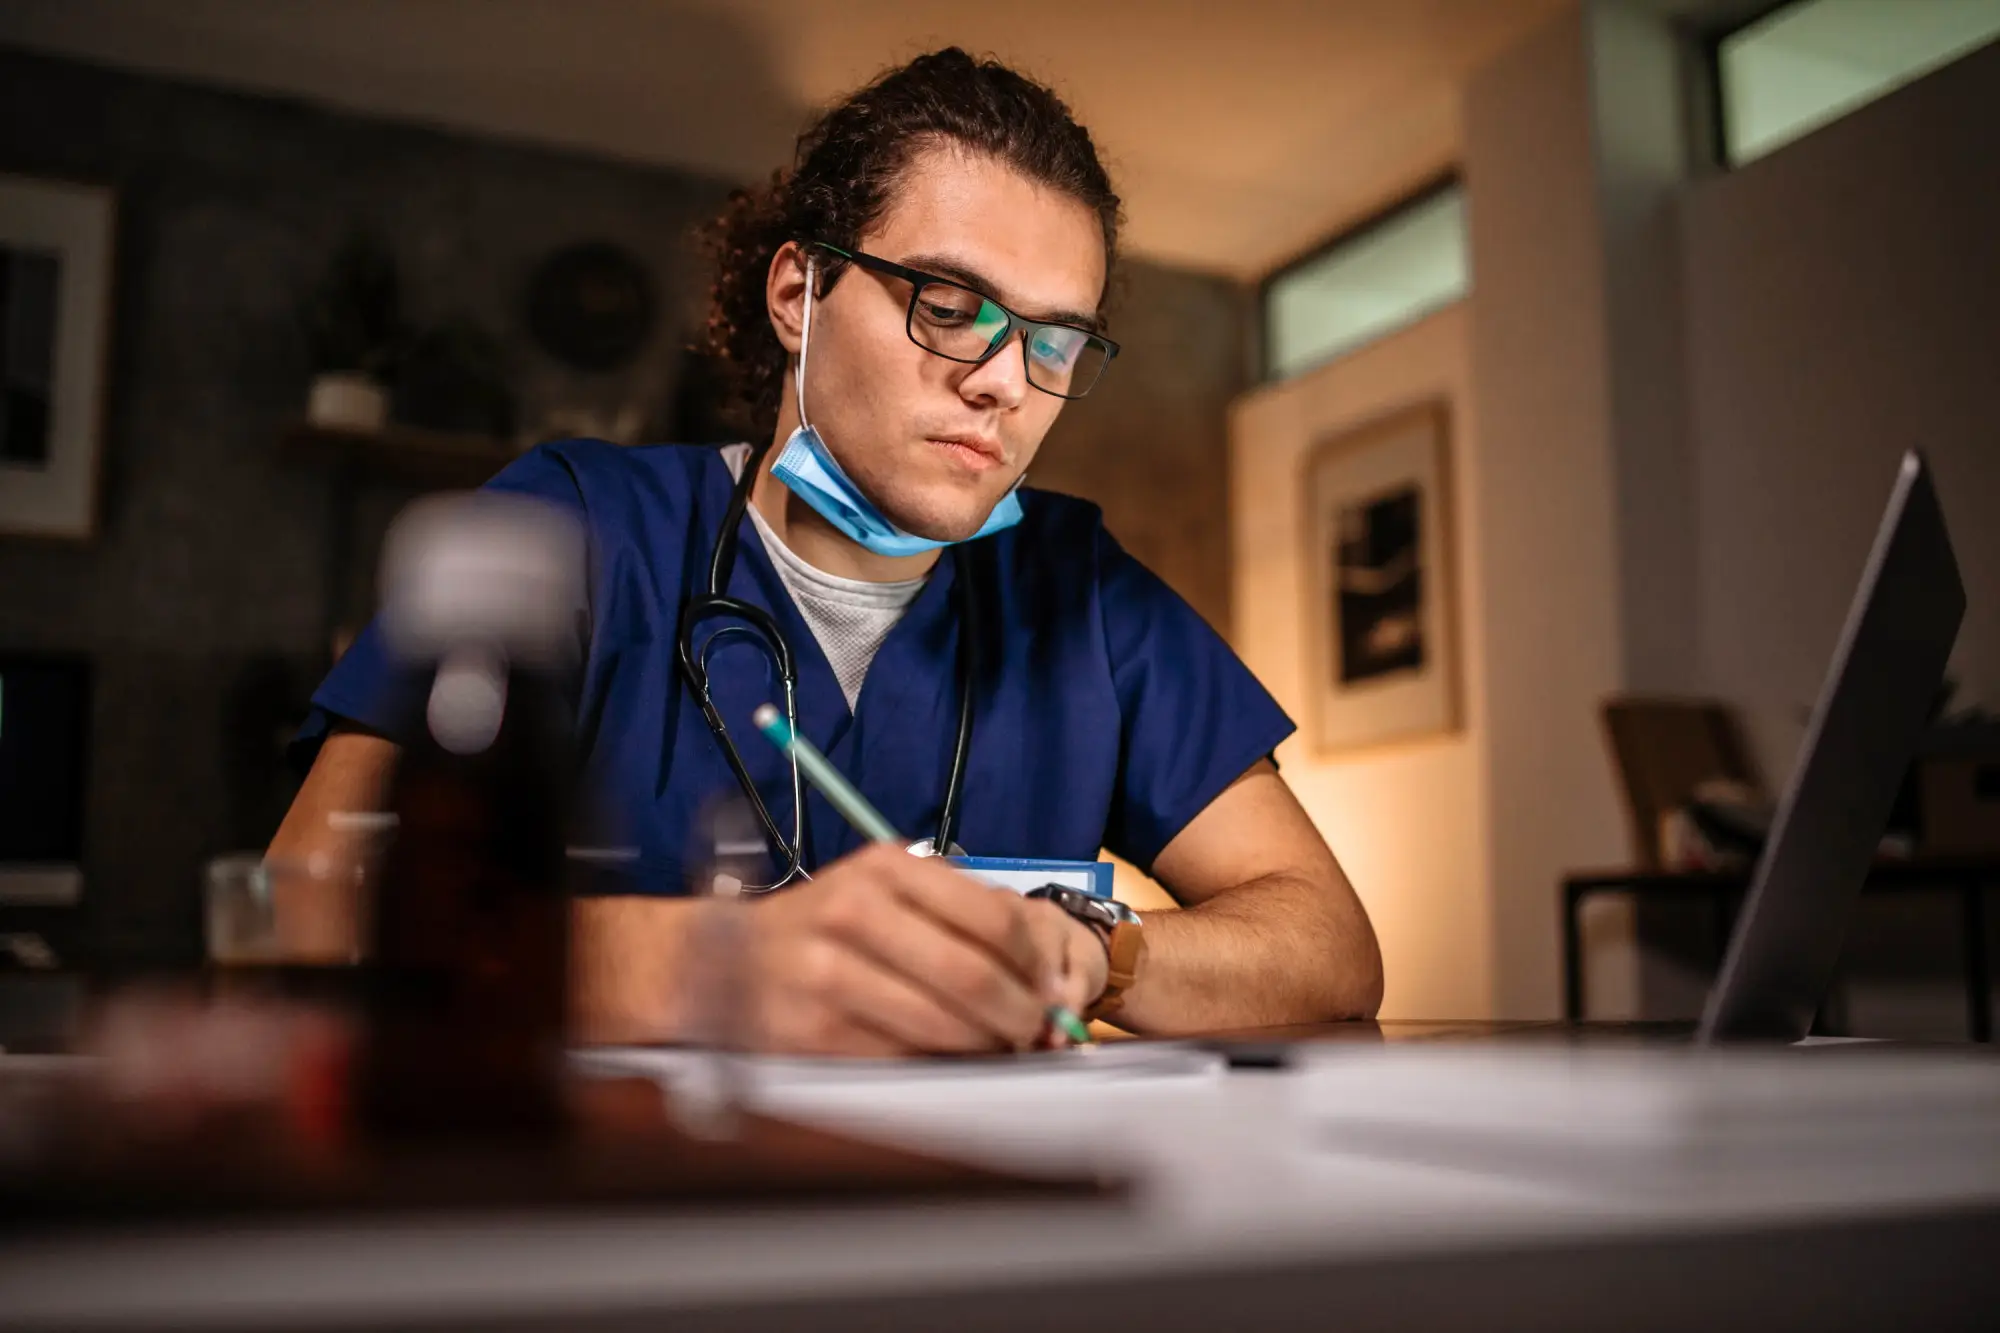 medical professional man with glasses writing something down